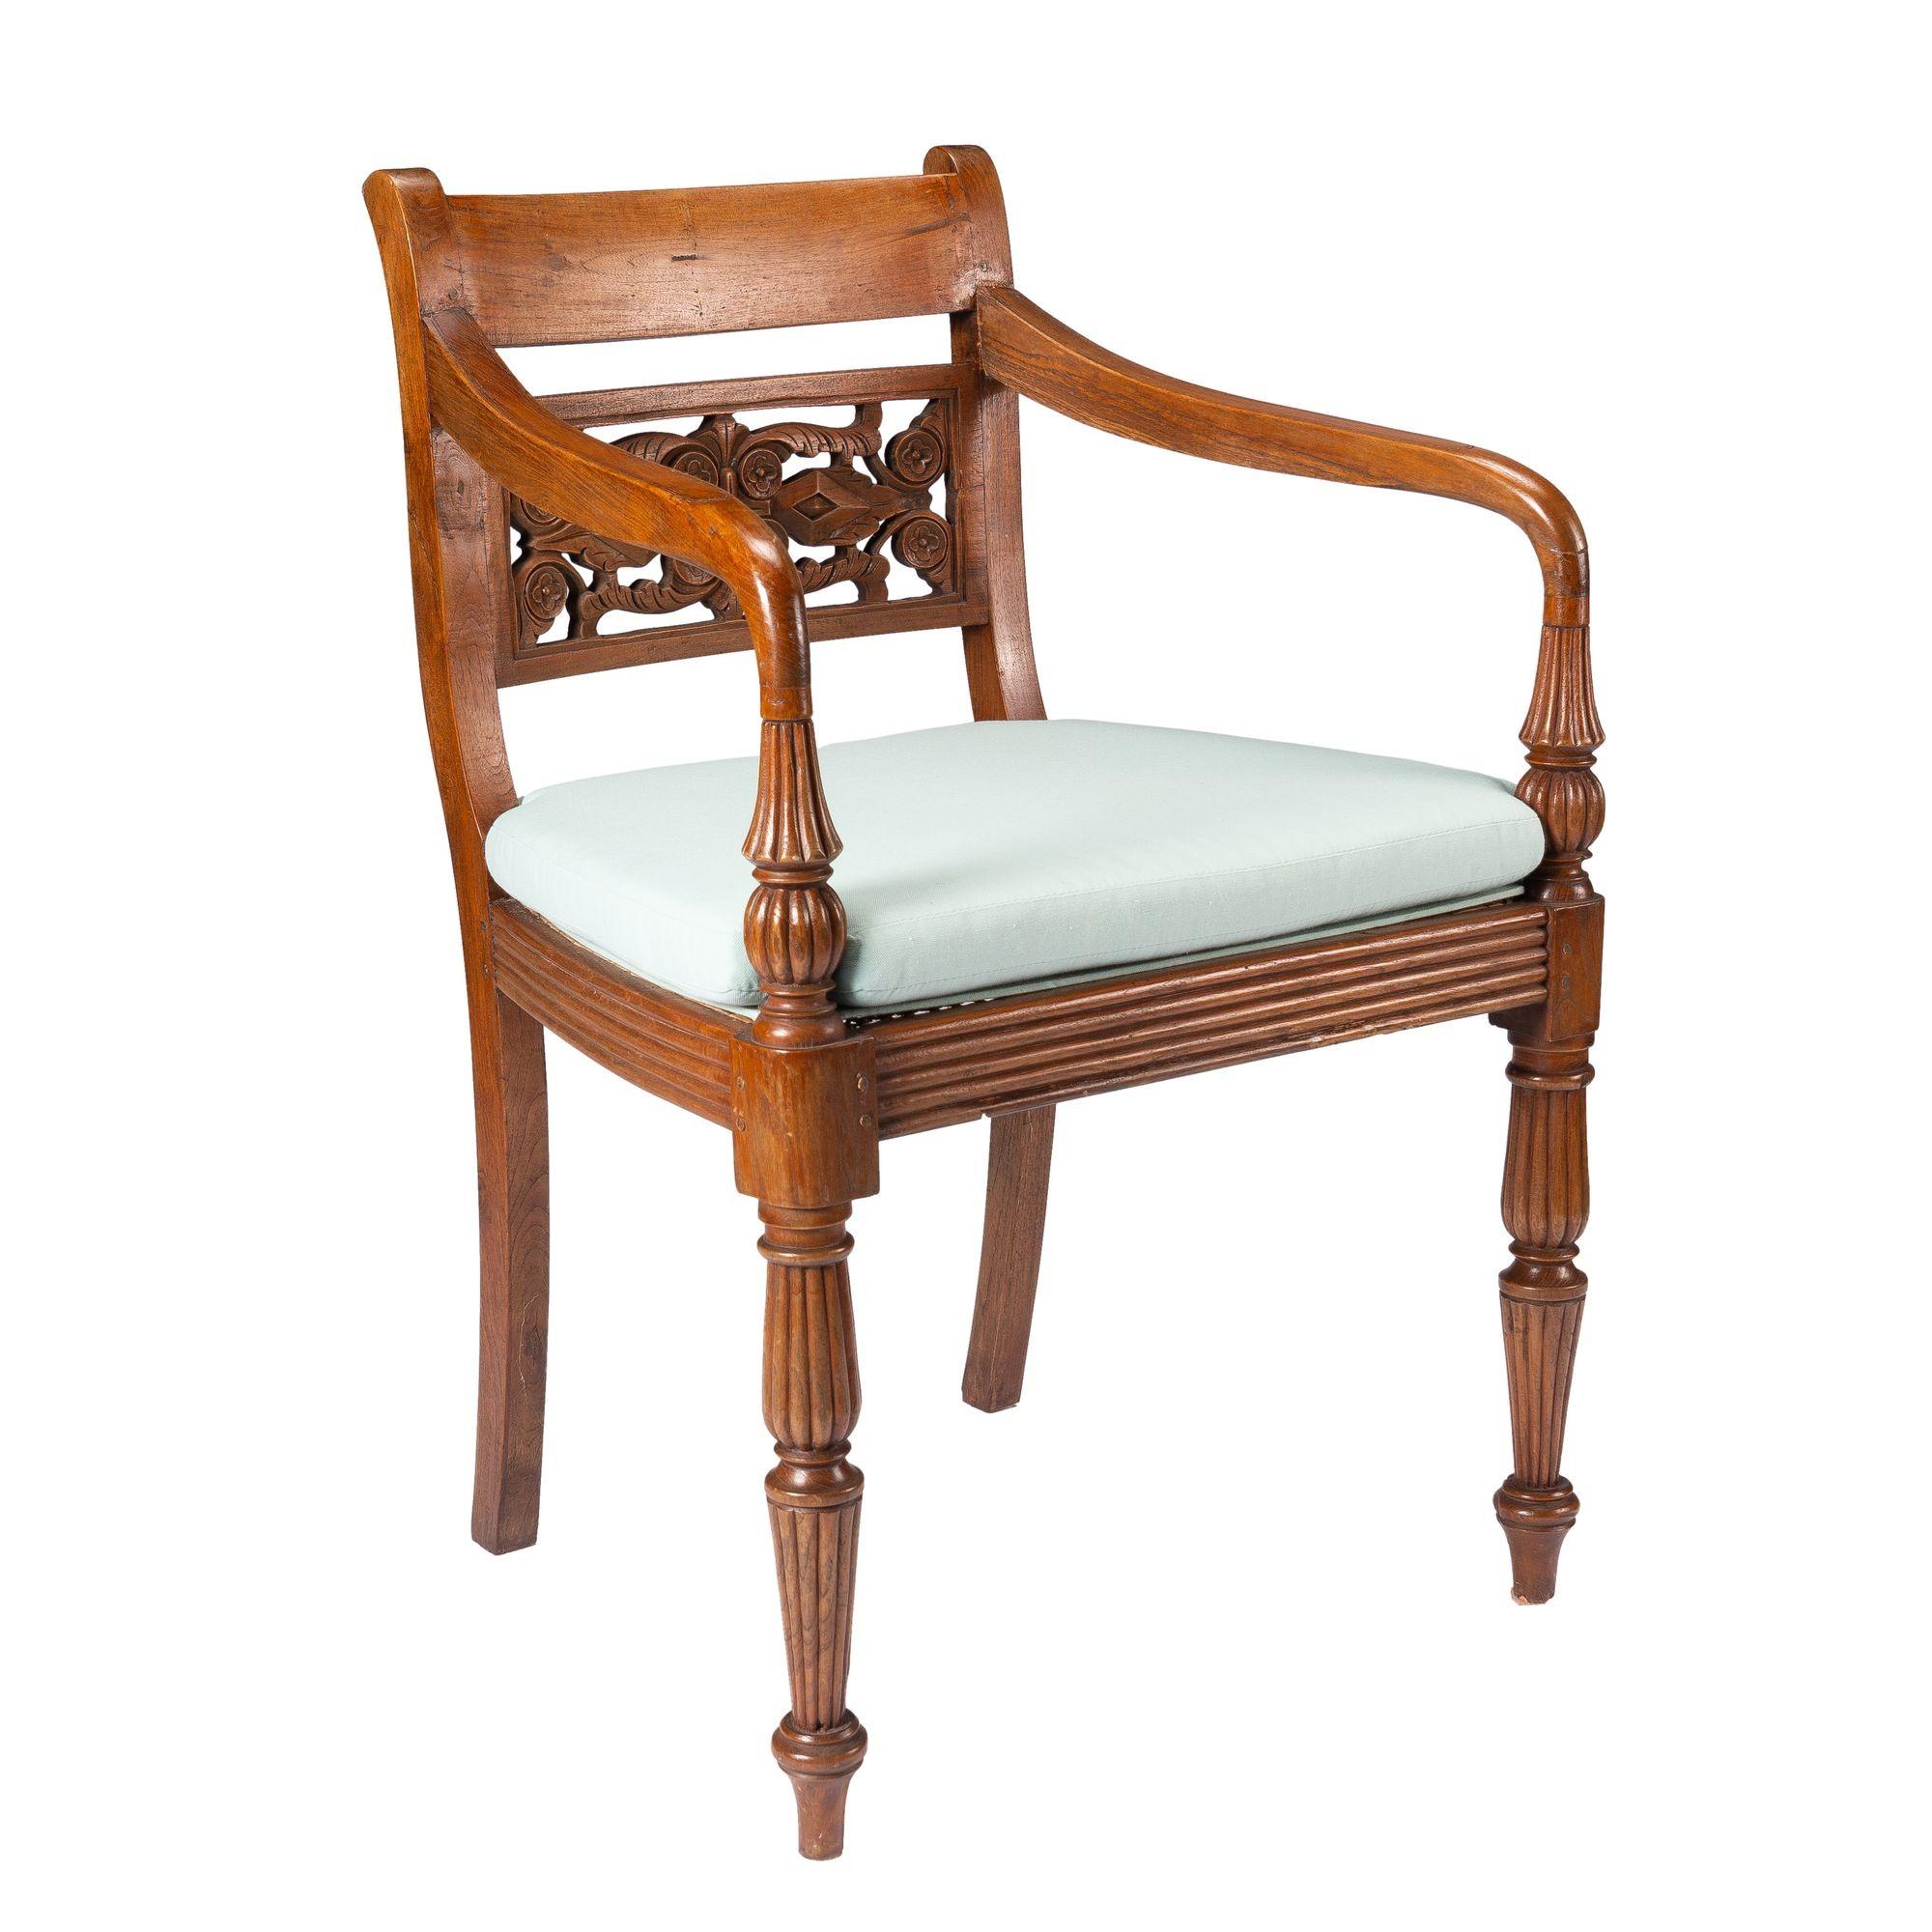 Anglo-Indian teak arm chair with caned seat and cushion, 1900-50 1